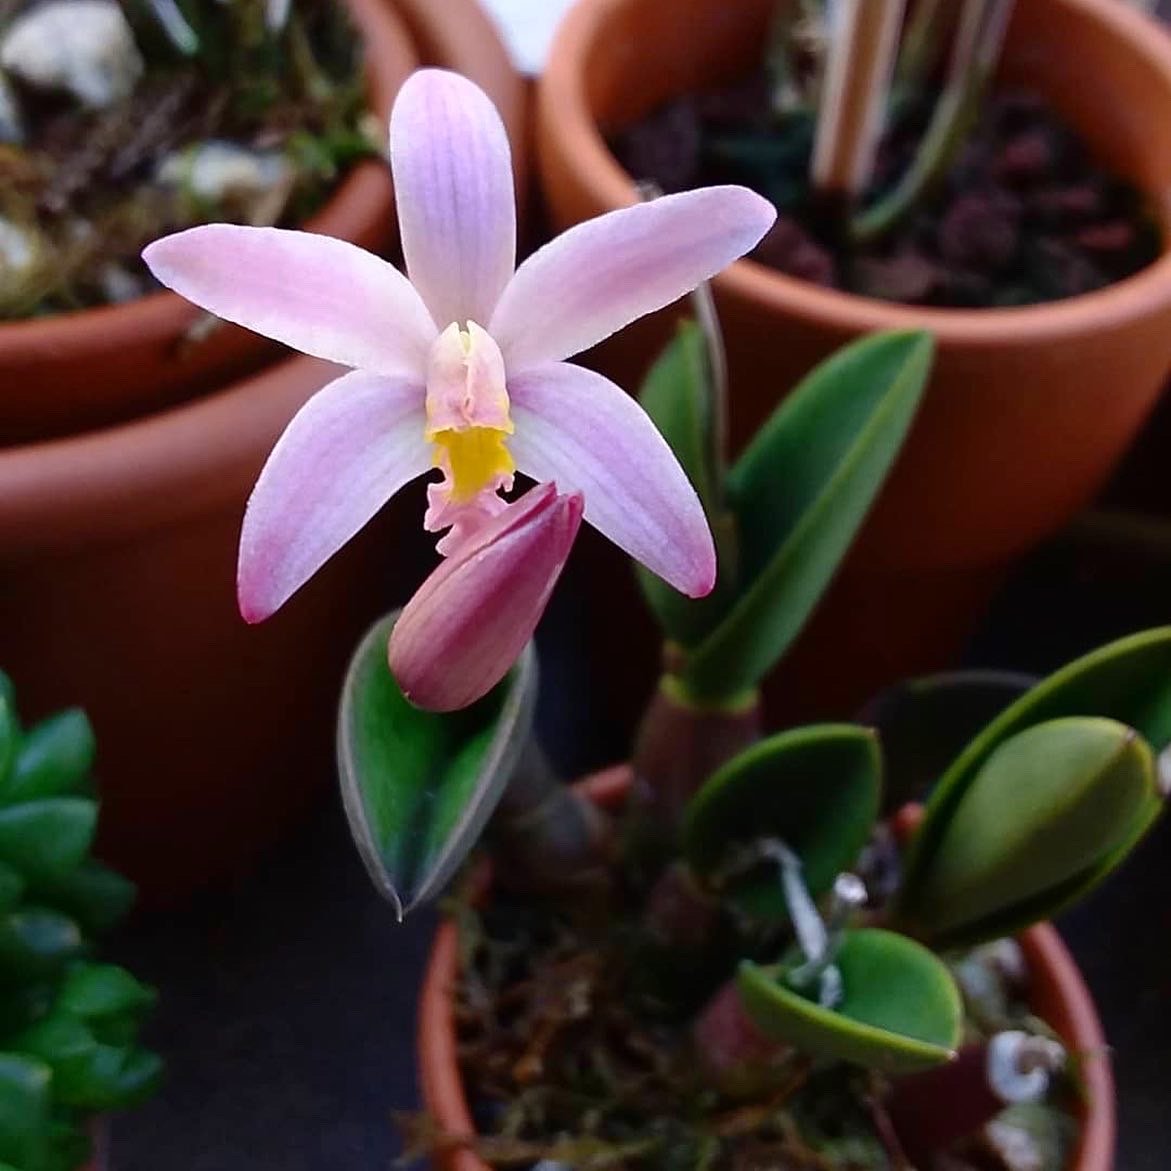 Suggestion to Stephen, the newly revised Cattleya known as the Rupicolous Laelias